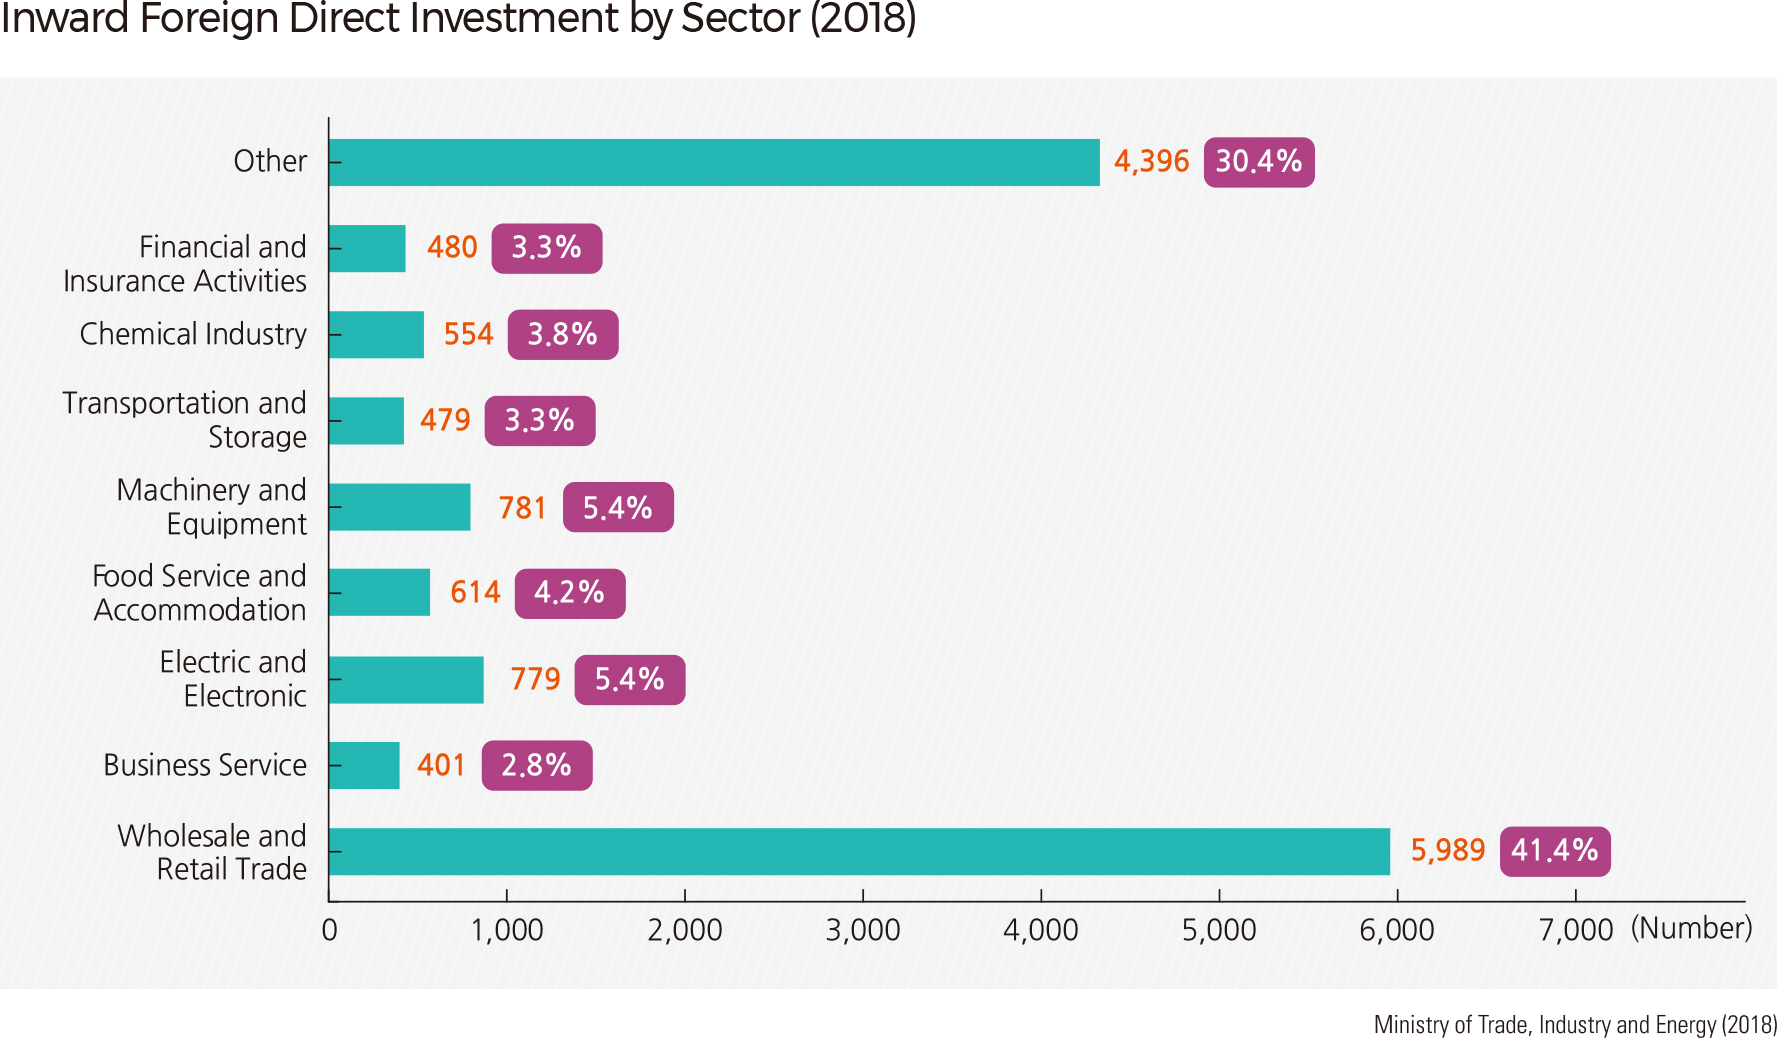 Inward Foreign Direct Investment by Sector (2018)